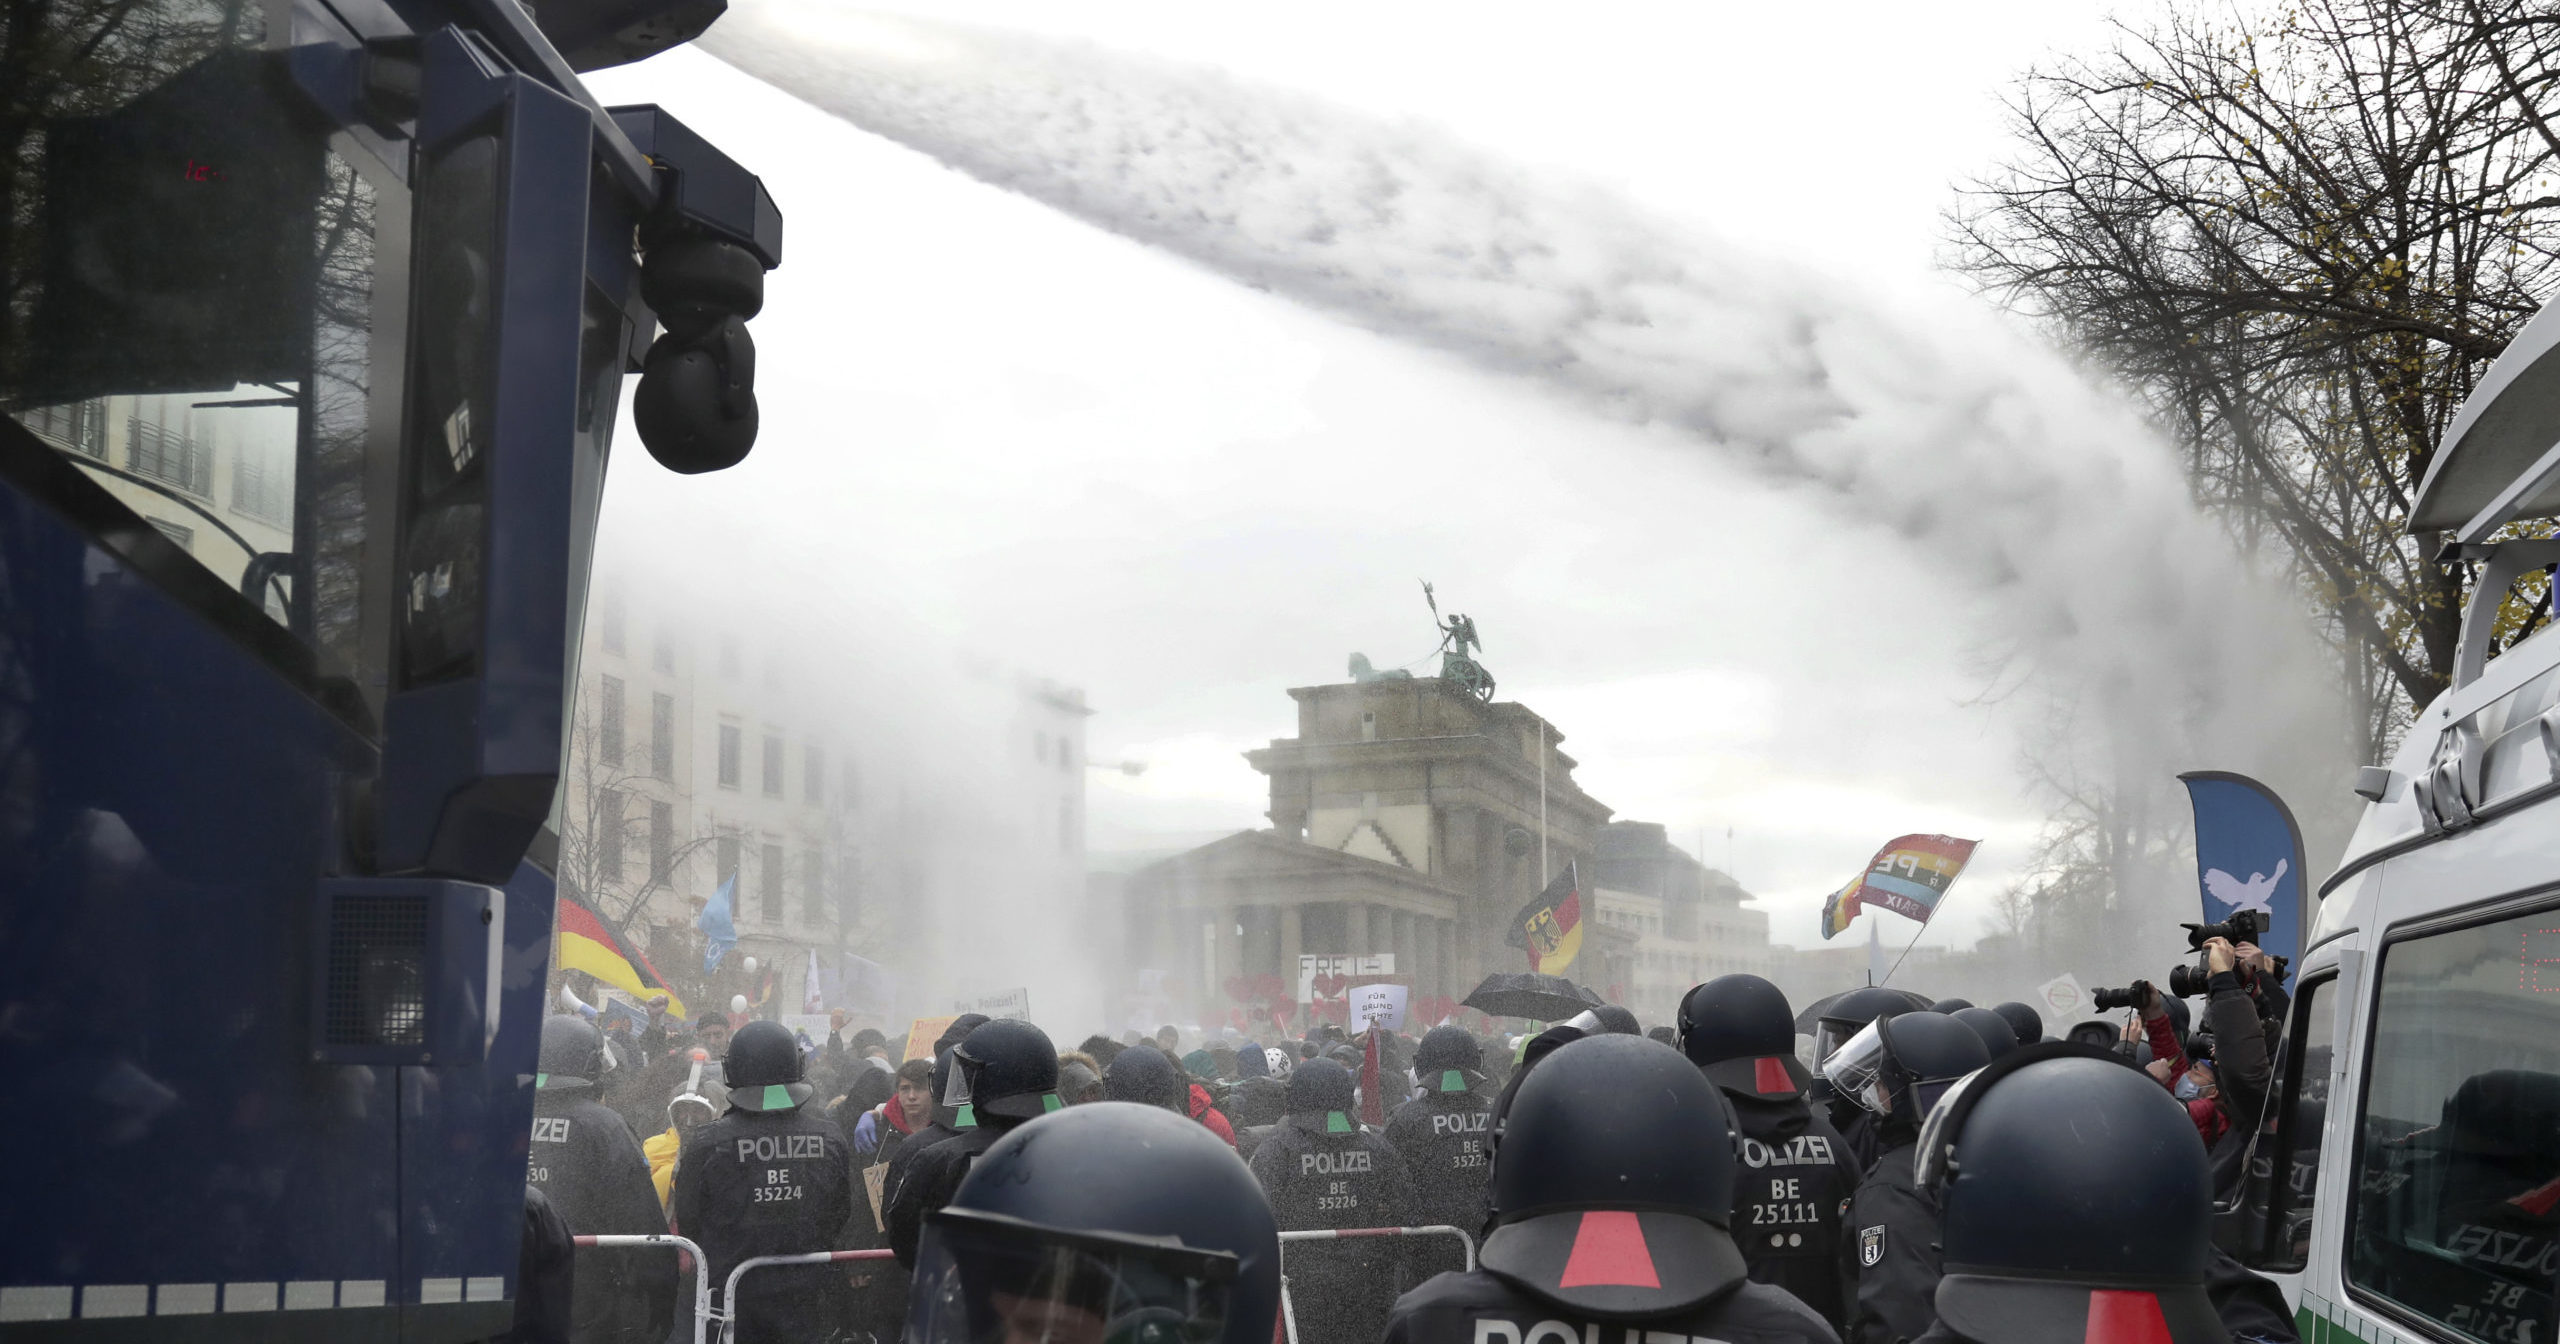 Police use water cannons to move people protesting coronavirus restrictions Wednesday near the Brandenburg Gate in Berlin.